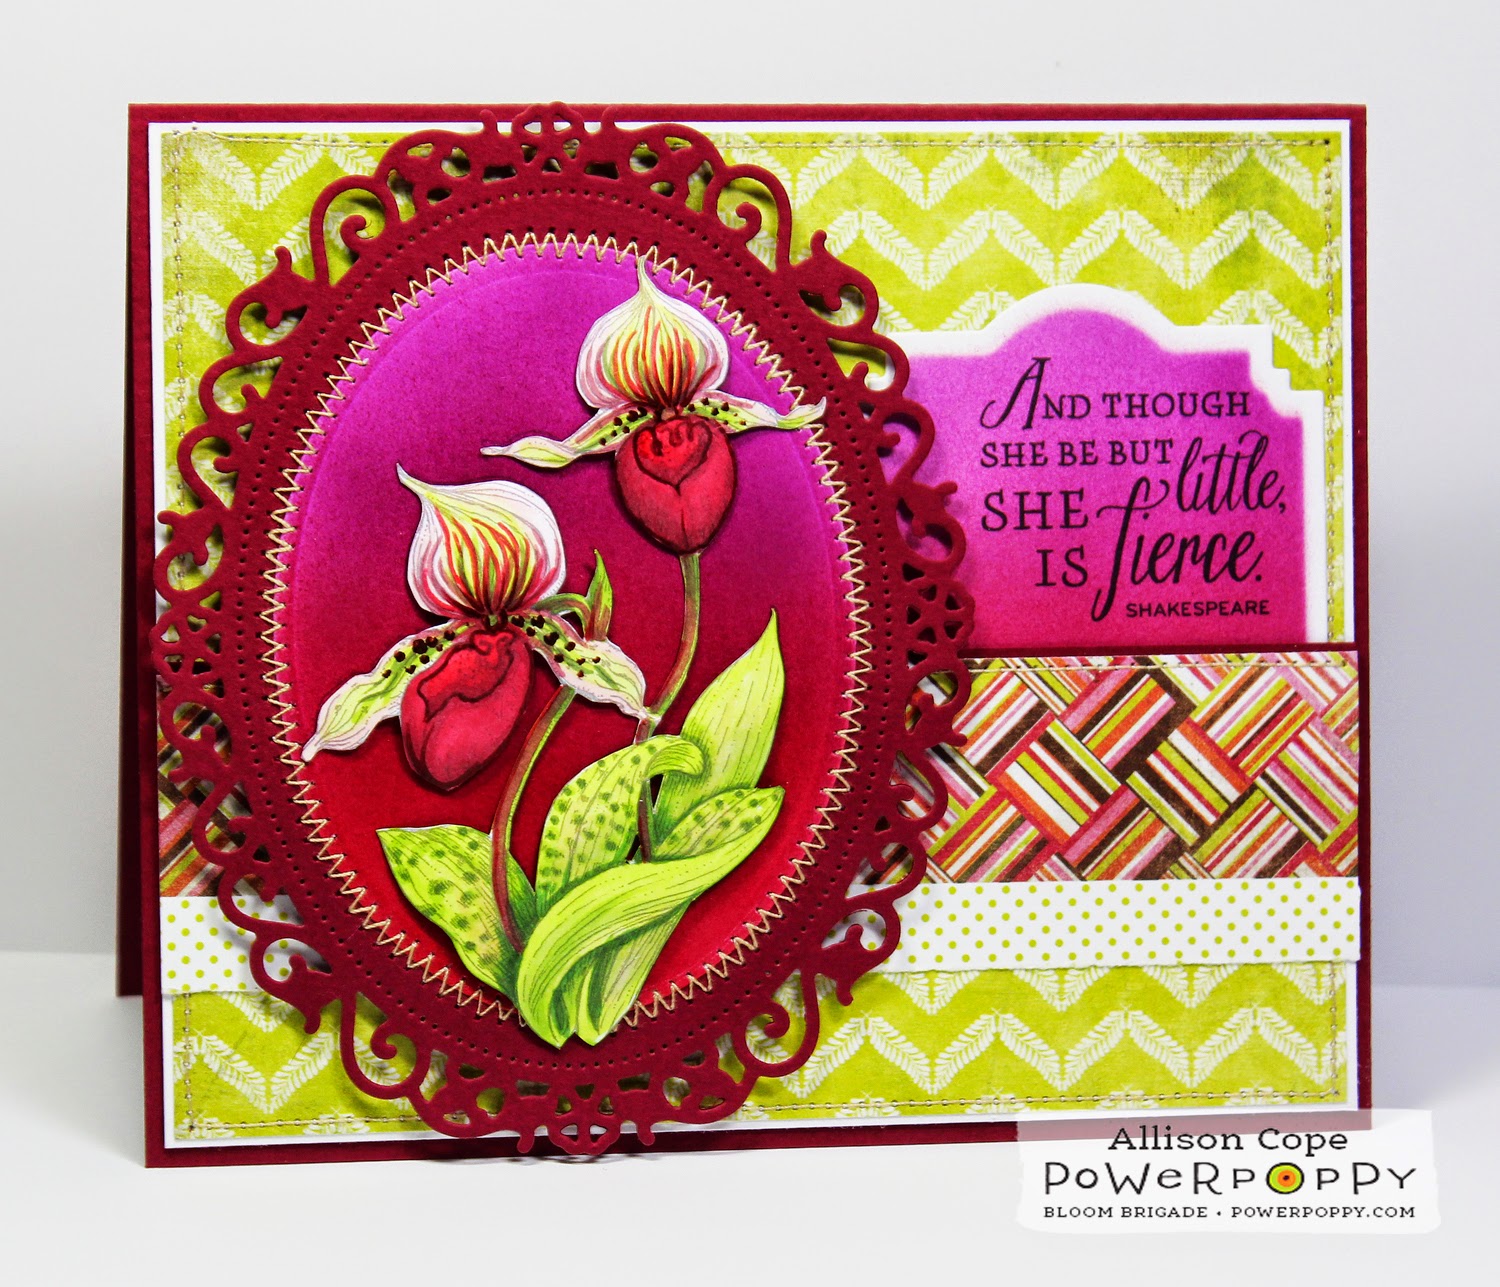 Orchids Rock by Allison Cope for Power Poppy